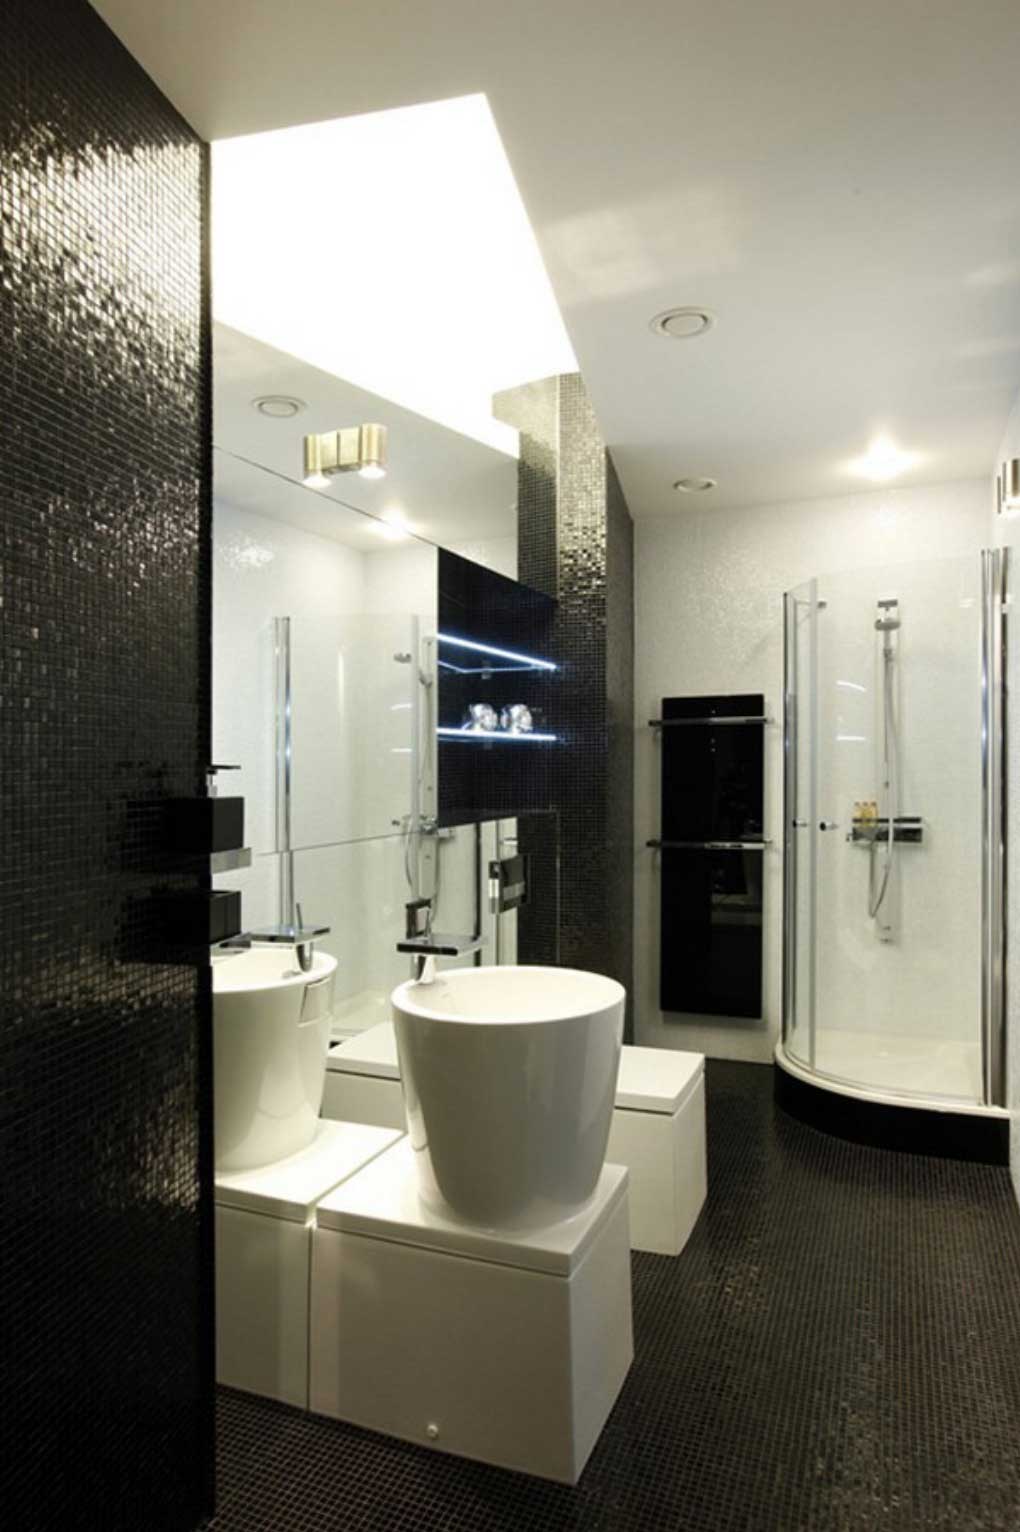 White And Decorating Modern White And Black Bathroom Decorating Ideas With Long Narrow Spaces And Interesting Shower Design Also Simple Black Vanity Idea Plus Large Mirror Design Bathroom The Most Comfortable Bathroom Decorating Ideas